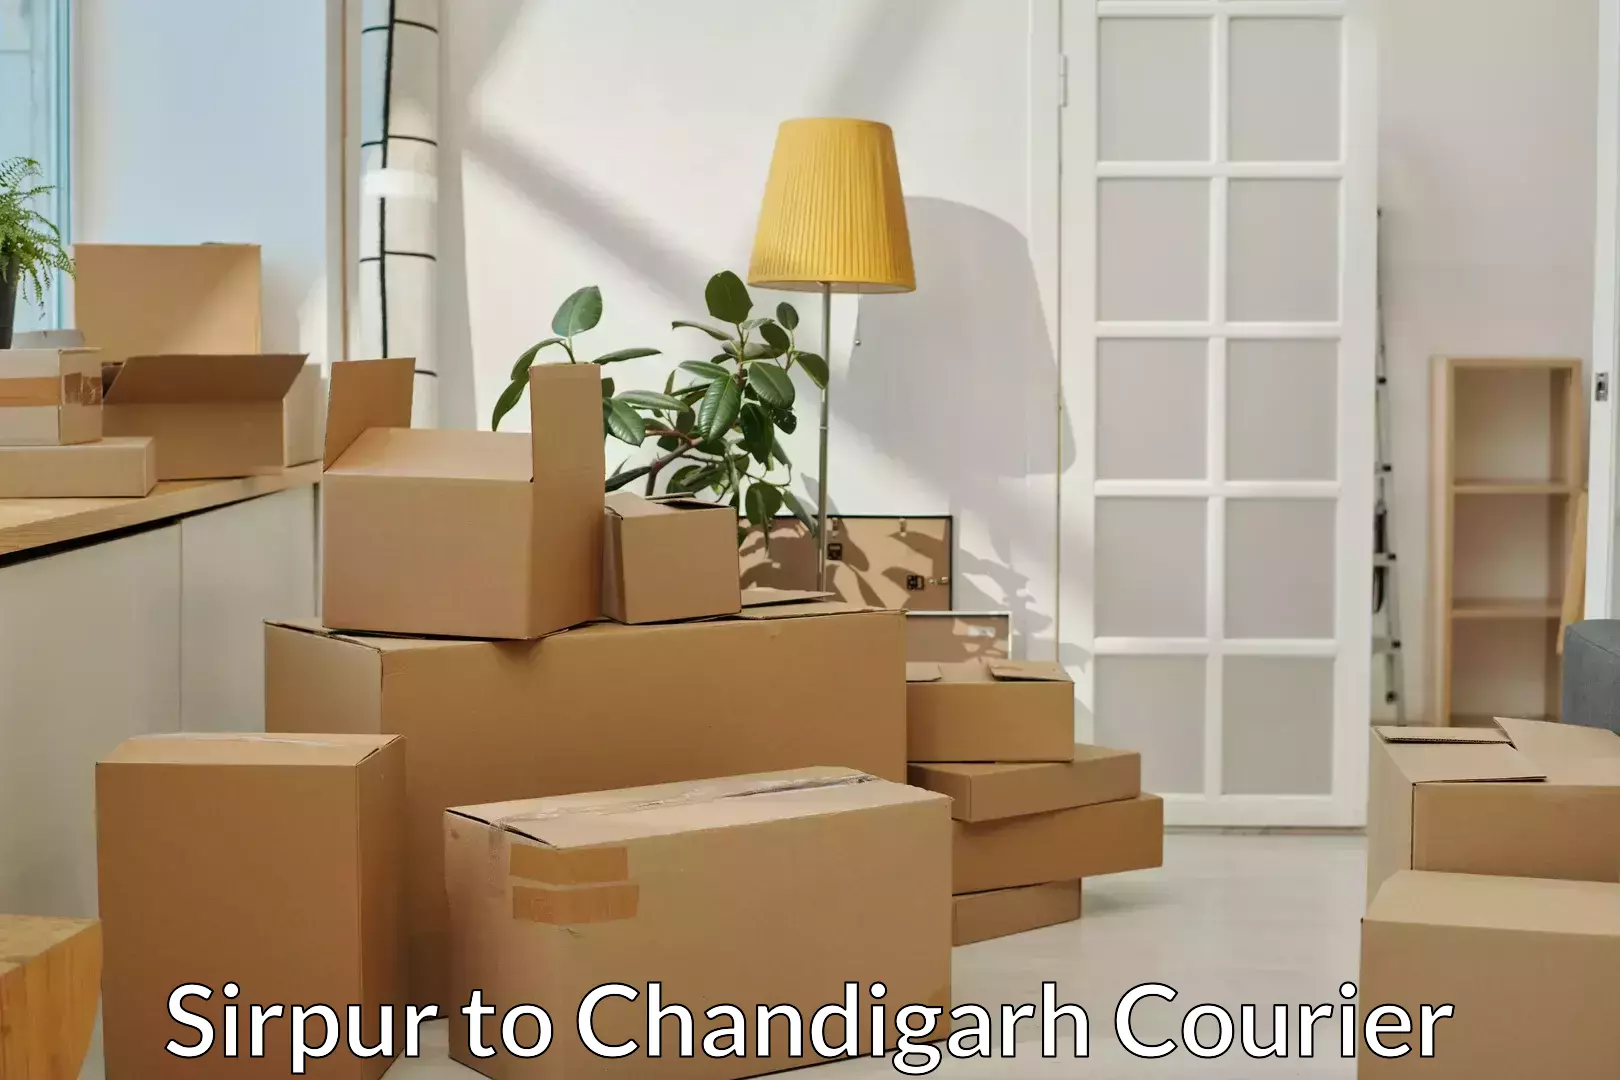 Furniture moving experts Sirpur to Chandigarh